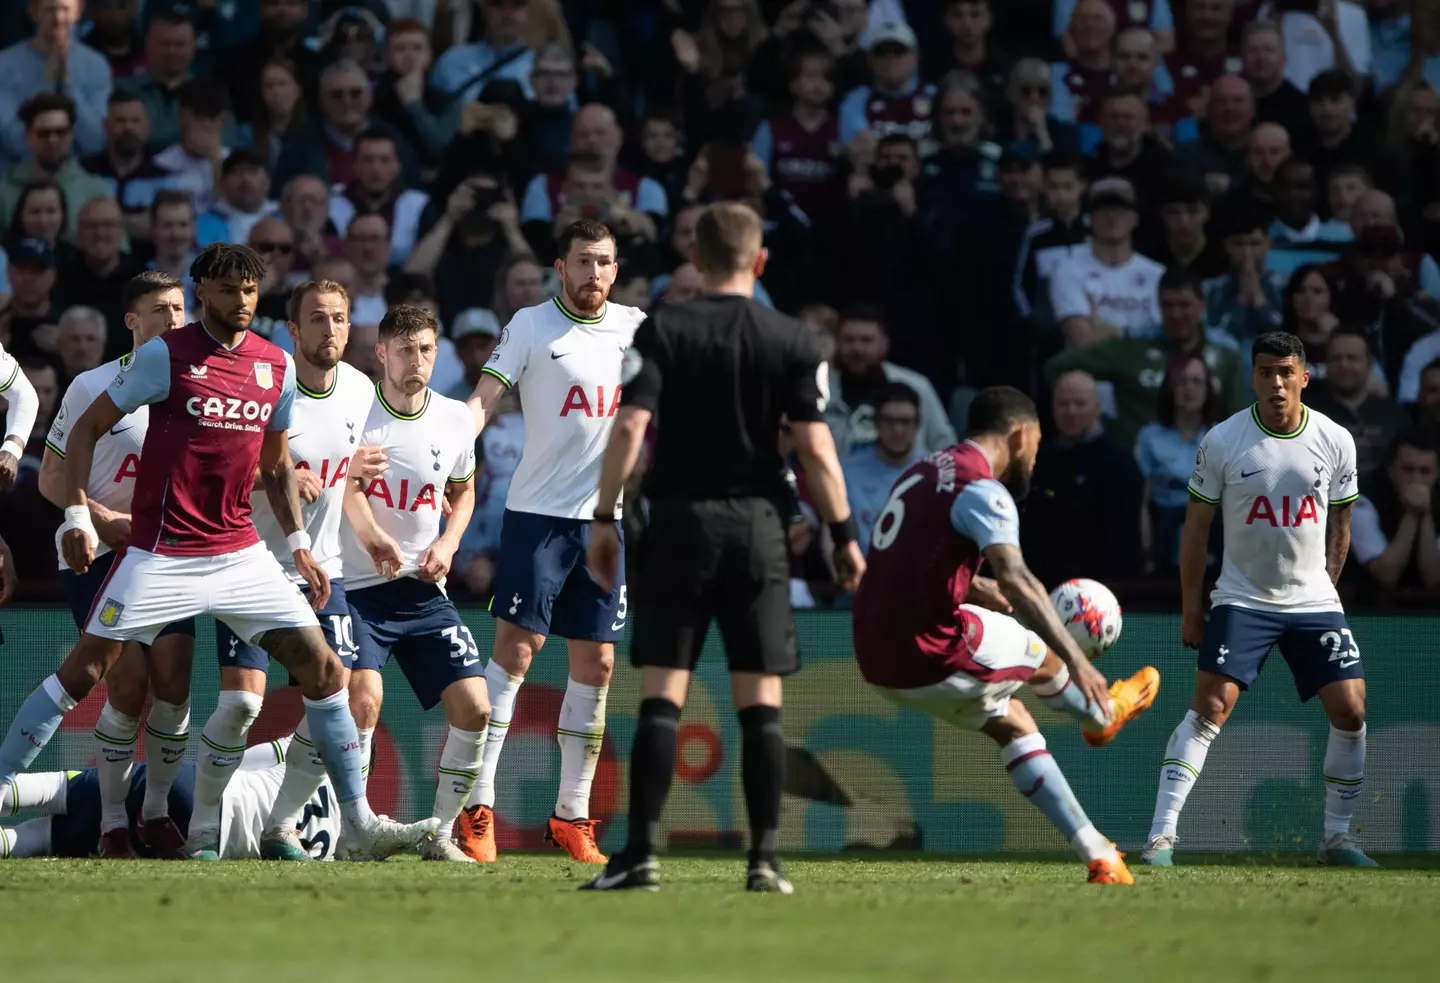 Villa beat Spurs 2-1 when the two sides last met in May. (Image